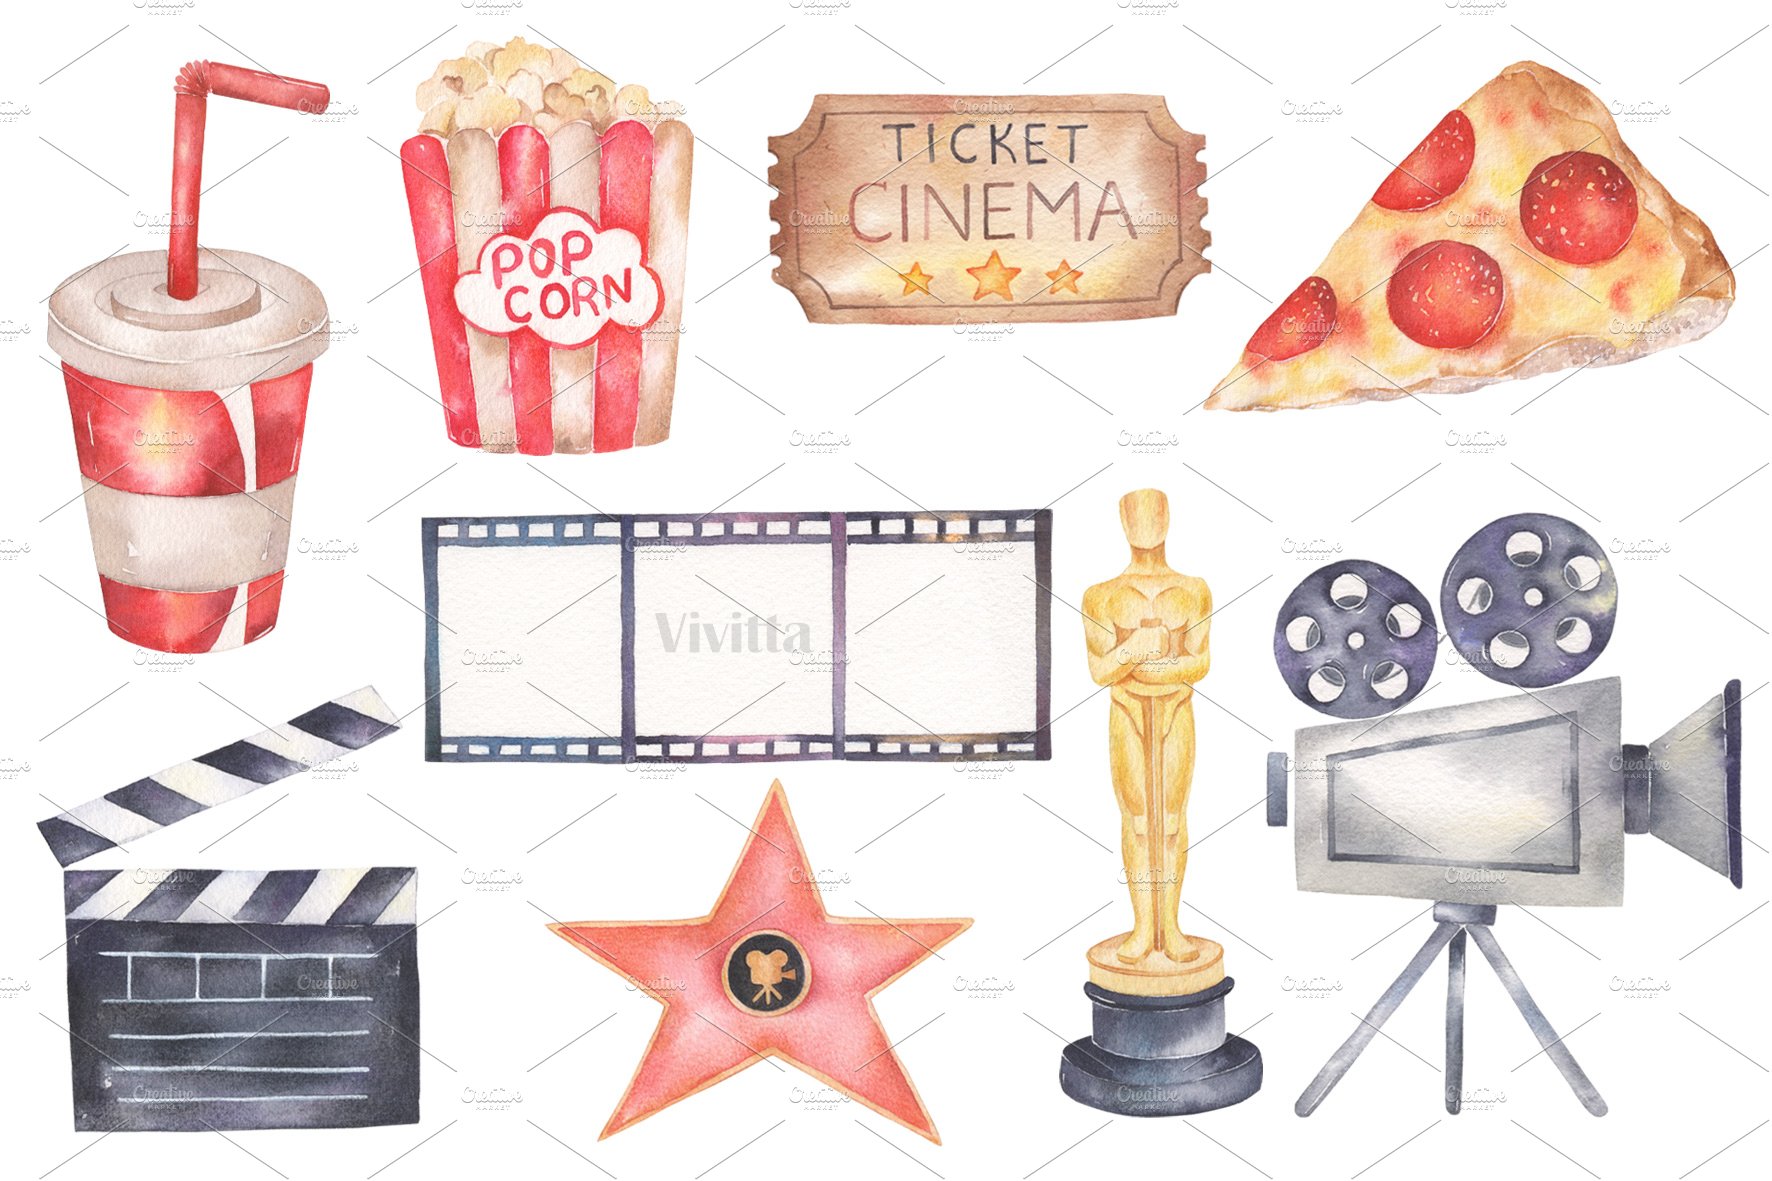 Some watercolor movie items in a vintage style.